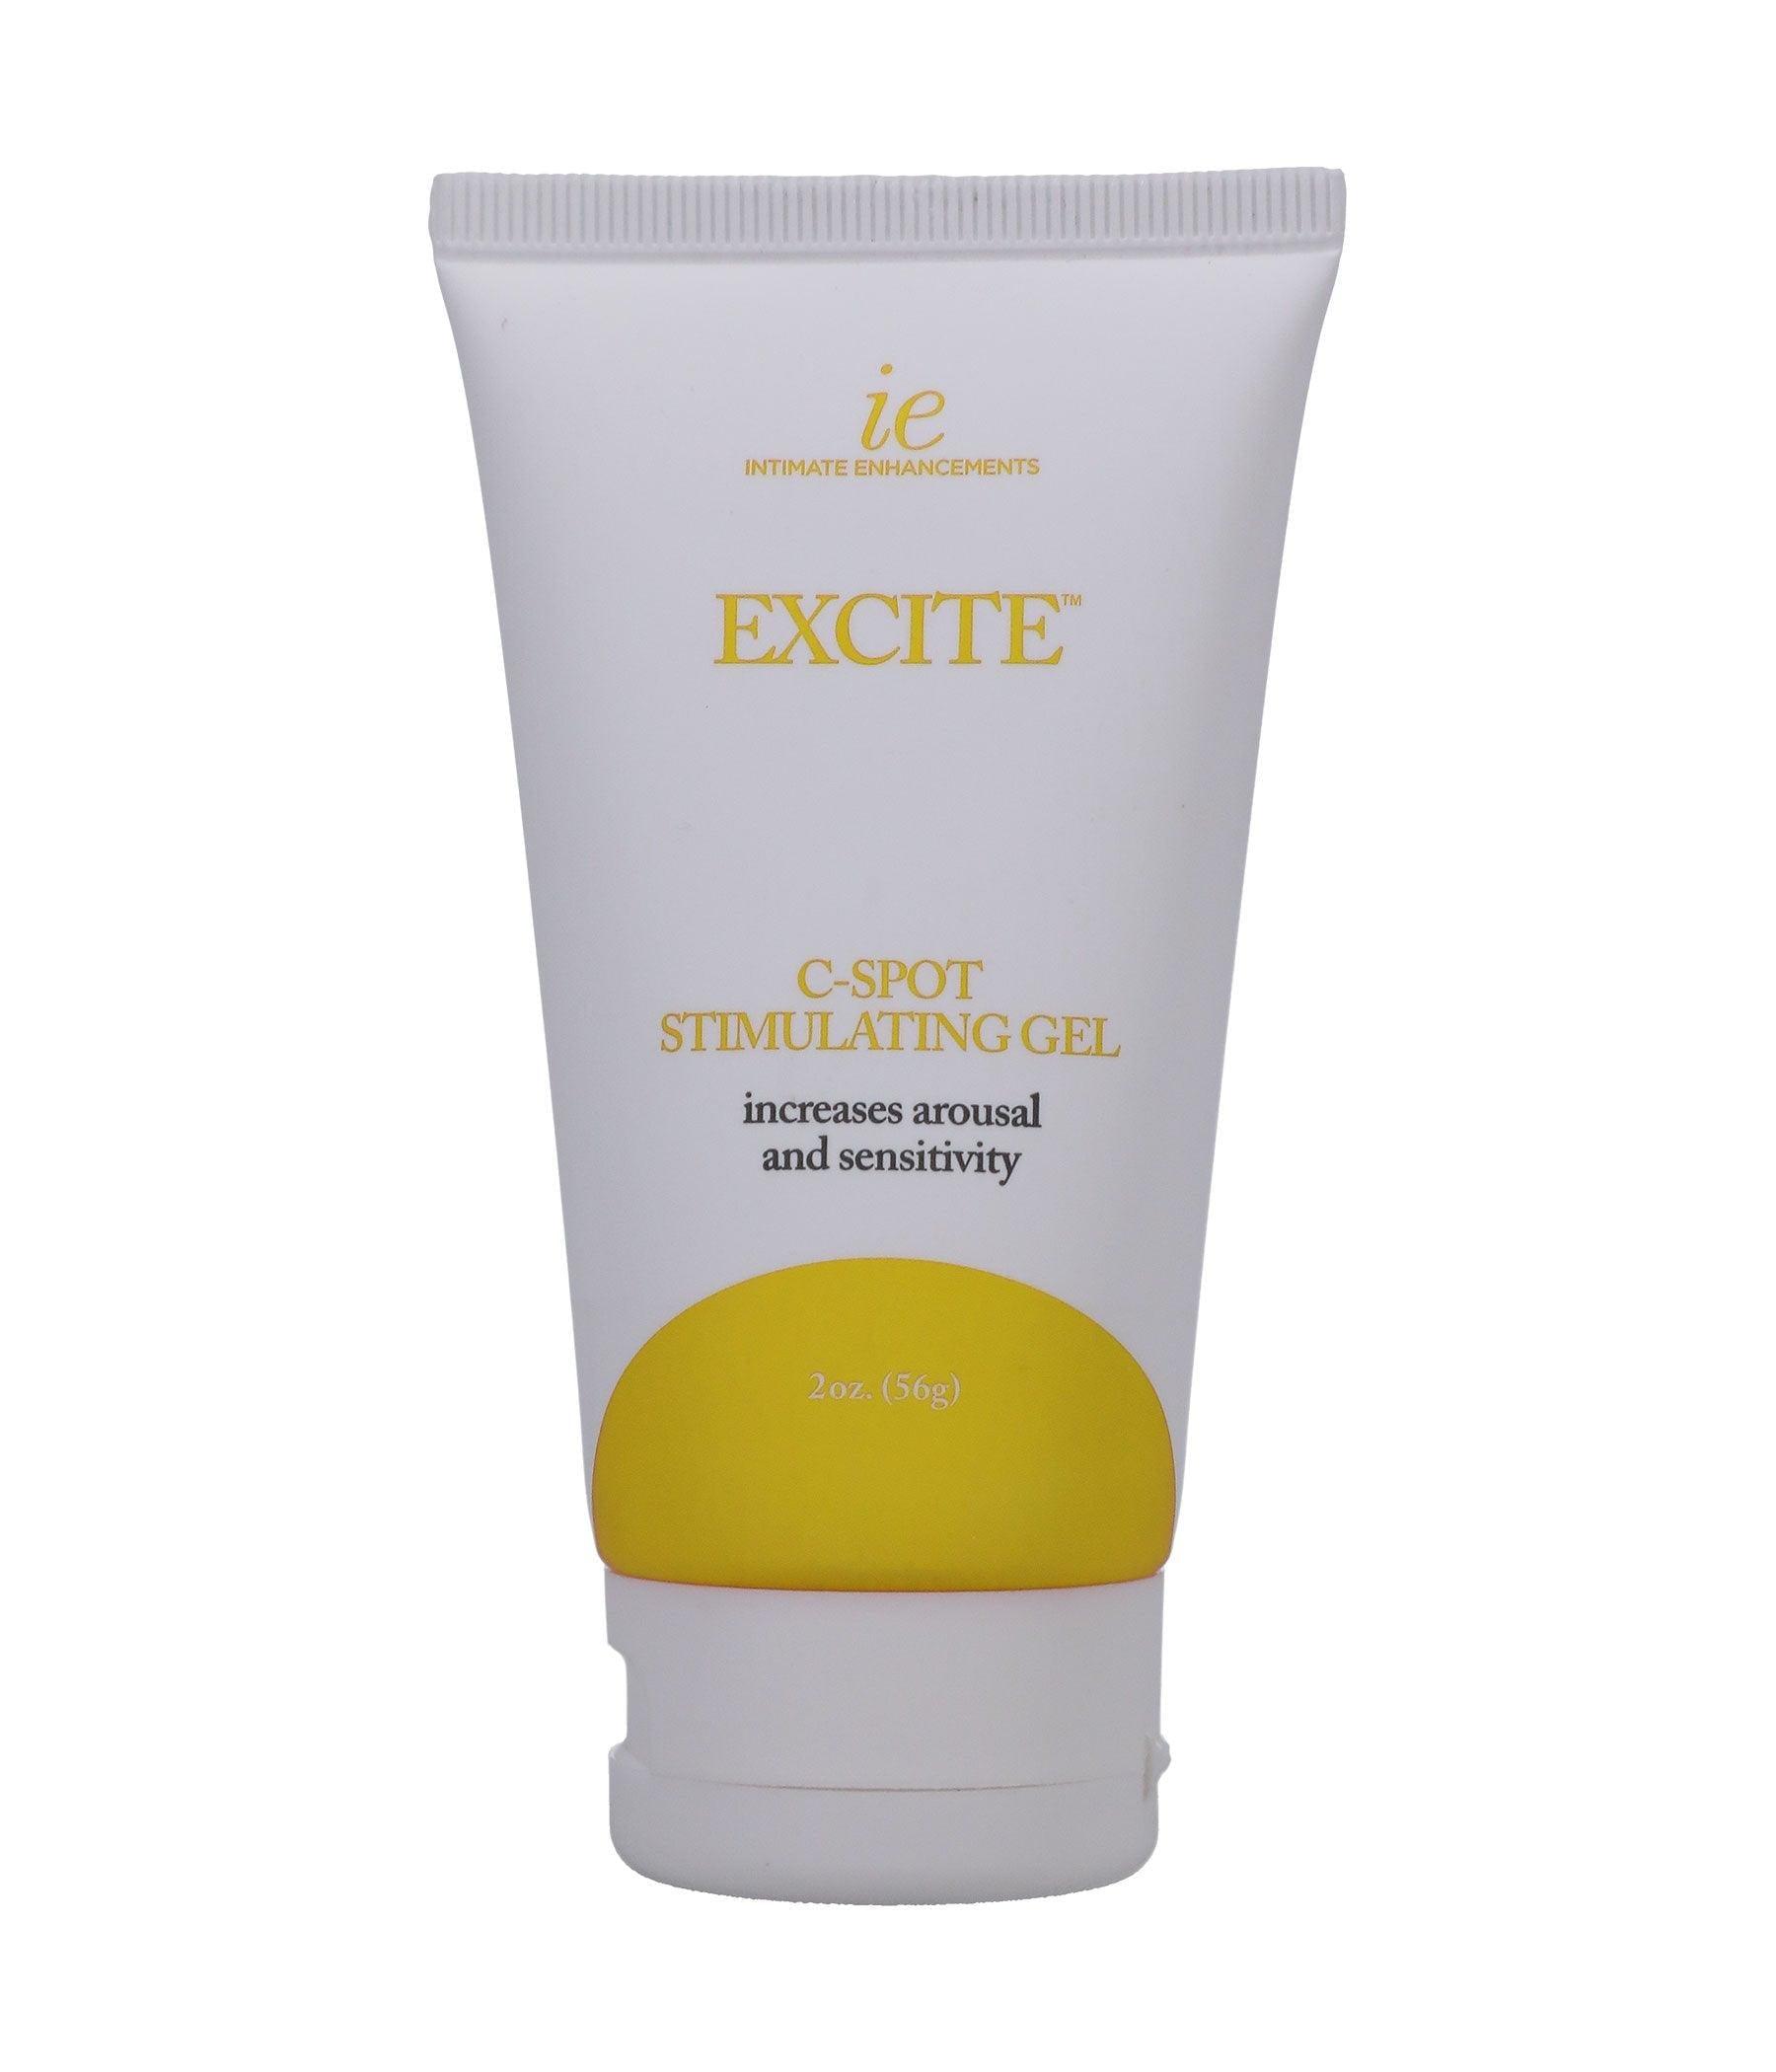 Intimate Enhancements Excite - C-Spot Stimulating Gel - 2 Oz. - Boxed - My Sex Toy Hub